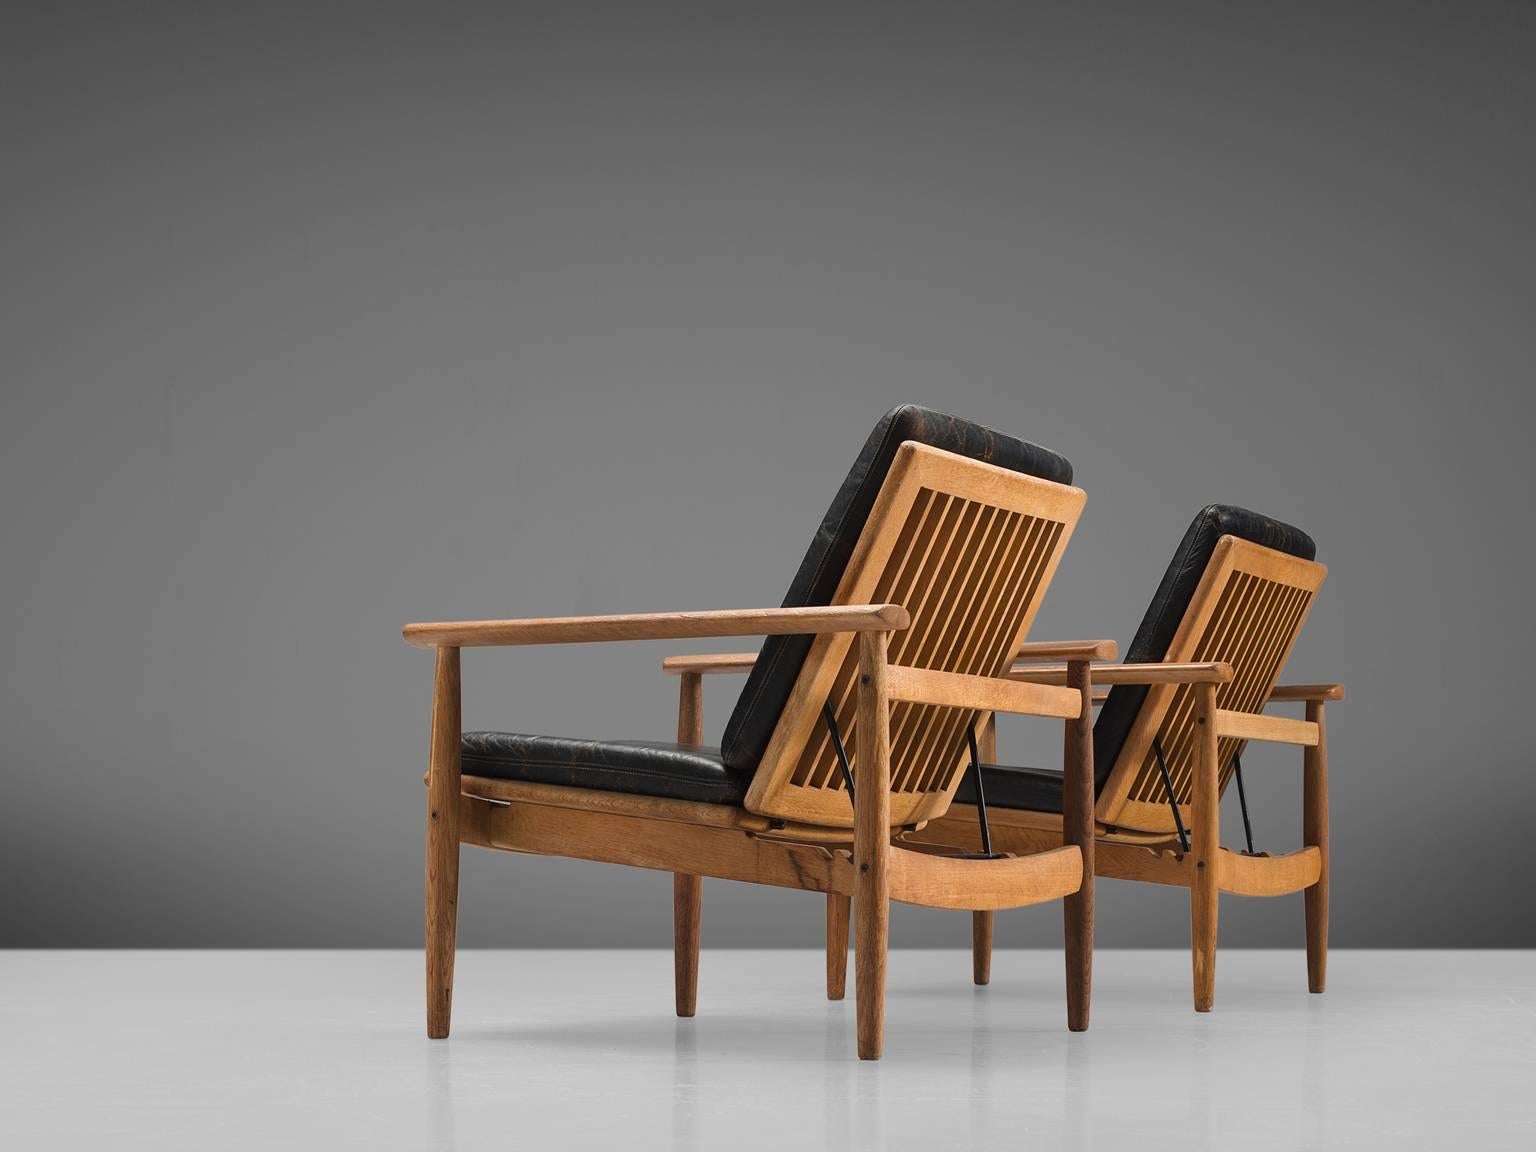 Johan Hagen, armchairs, oak, black leather, Denmark, 1960s.

These modest chairs with slatted backs are executed in oak and upholstered with black leather. The back is adjustable and can therefore be put in any desired position. 
Please note that